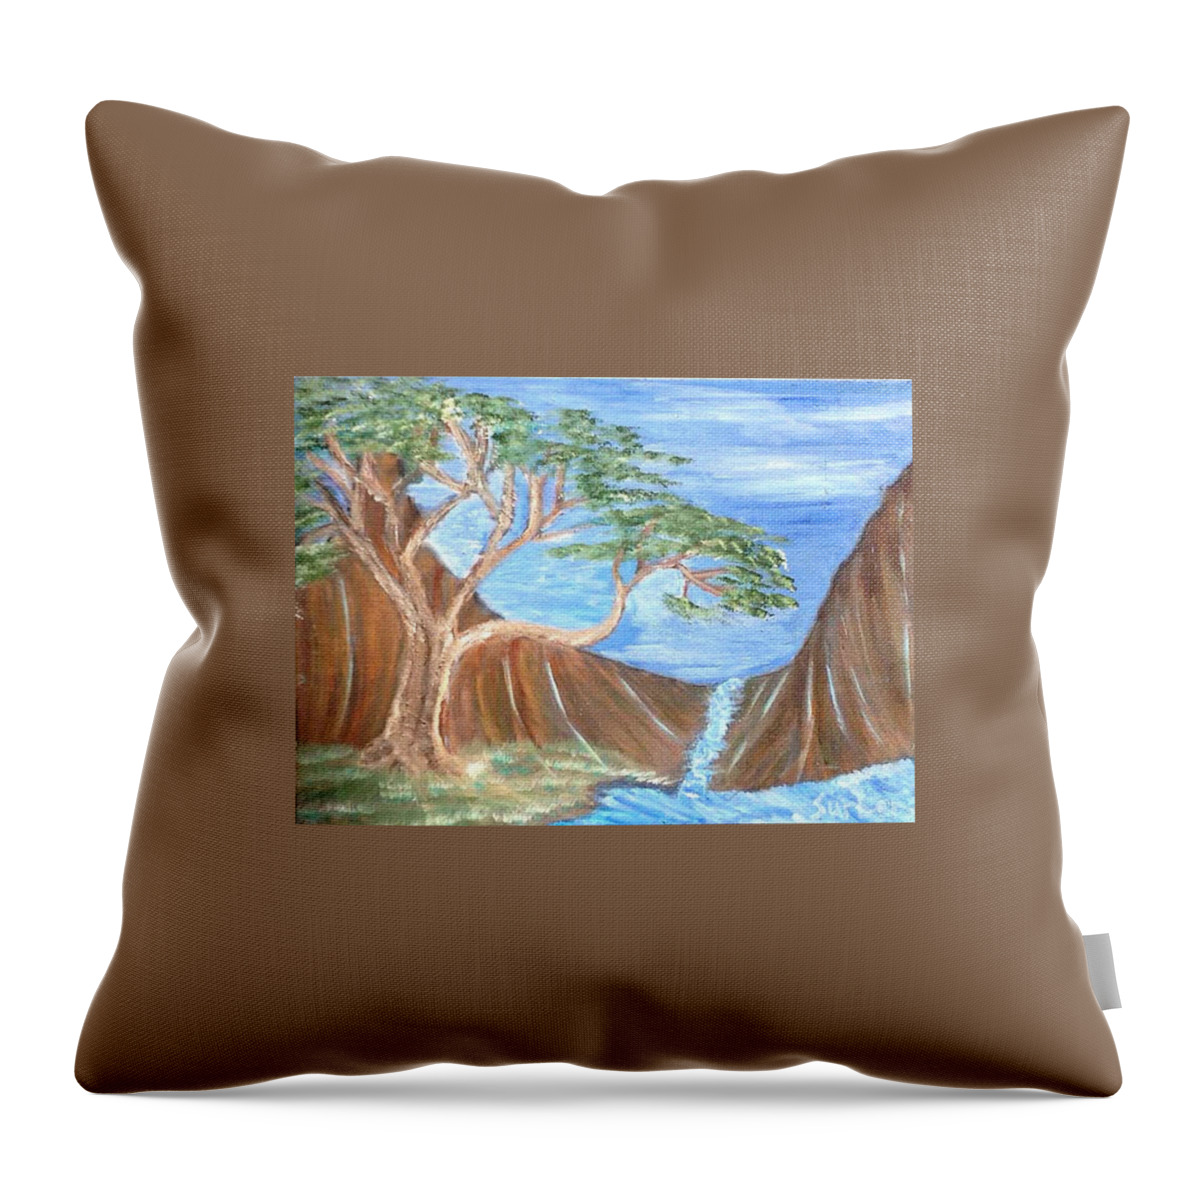 One Tree Throw Pillow featuring the painting One Tree by Suzanne Surber